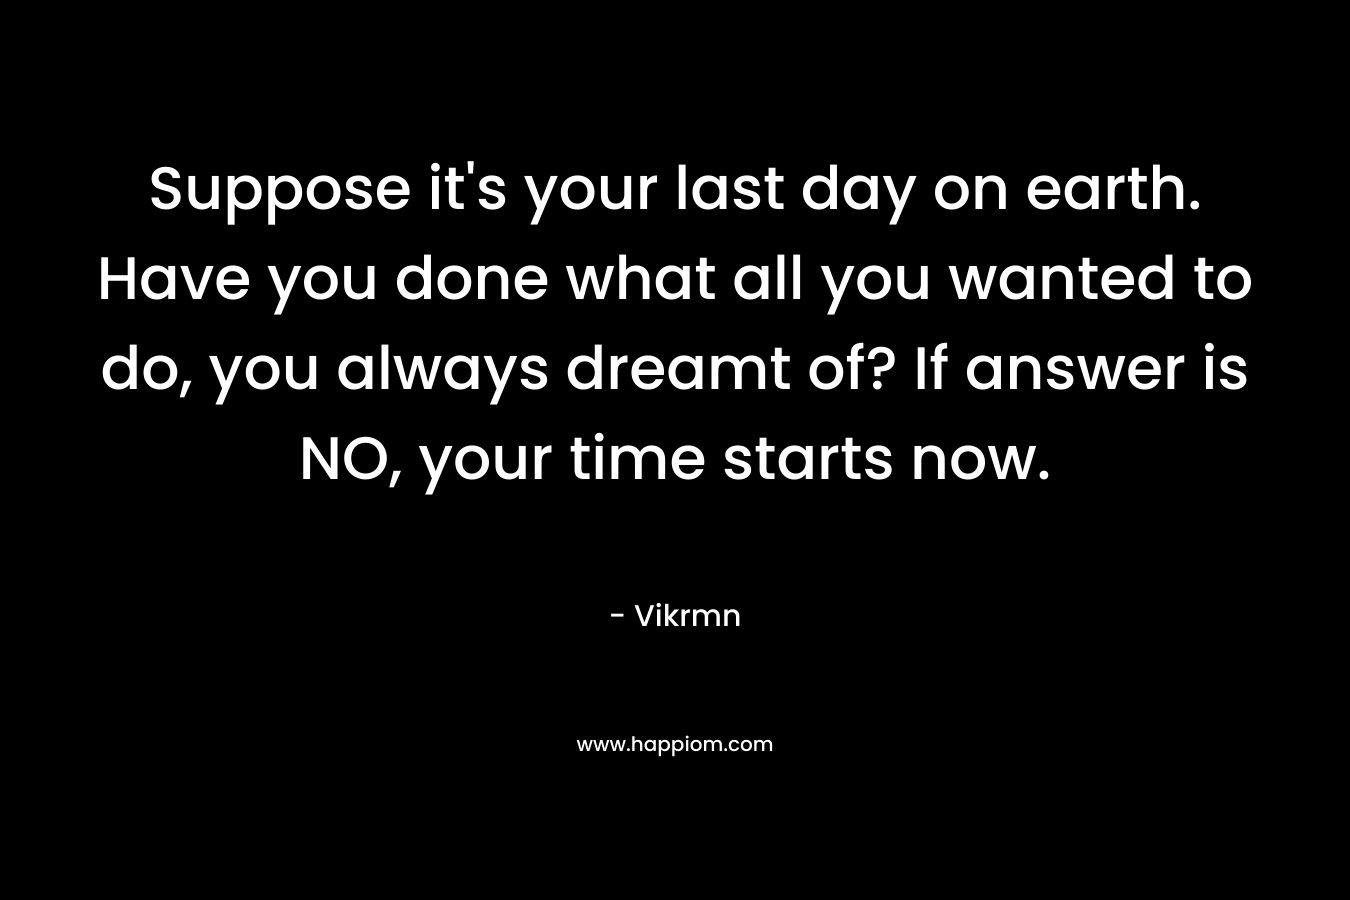 Suppose it's your last day on earth. Have you done what all you wanted to do, you always dreamt of? If answer is NO, your time starts now.